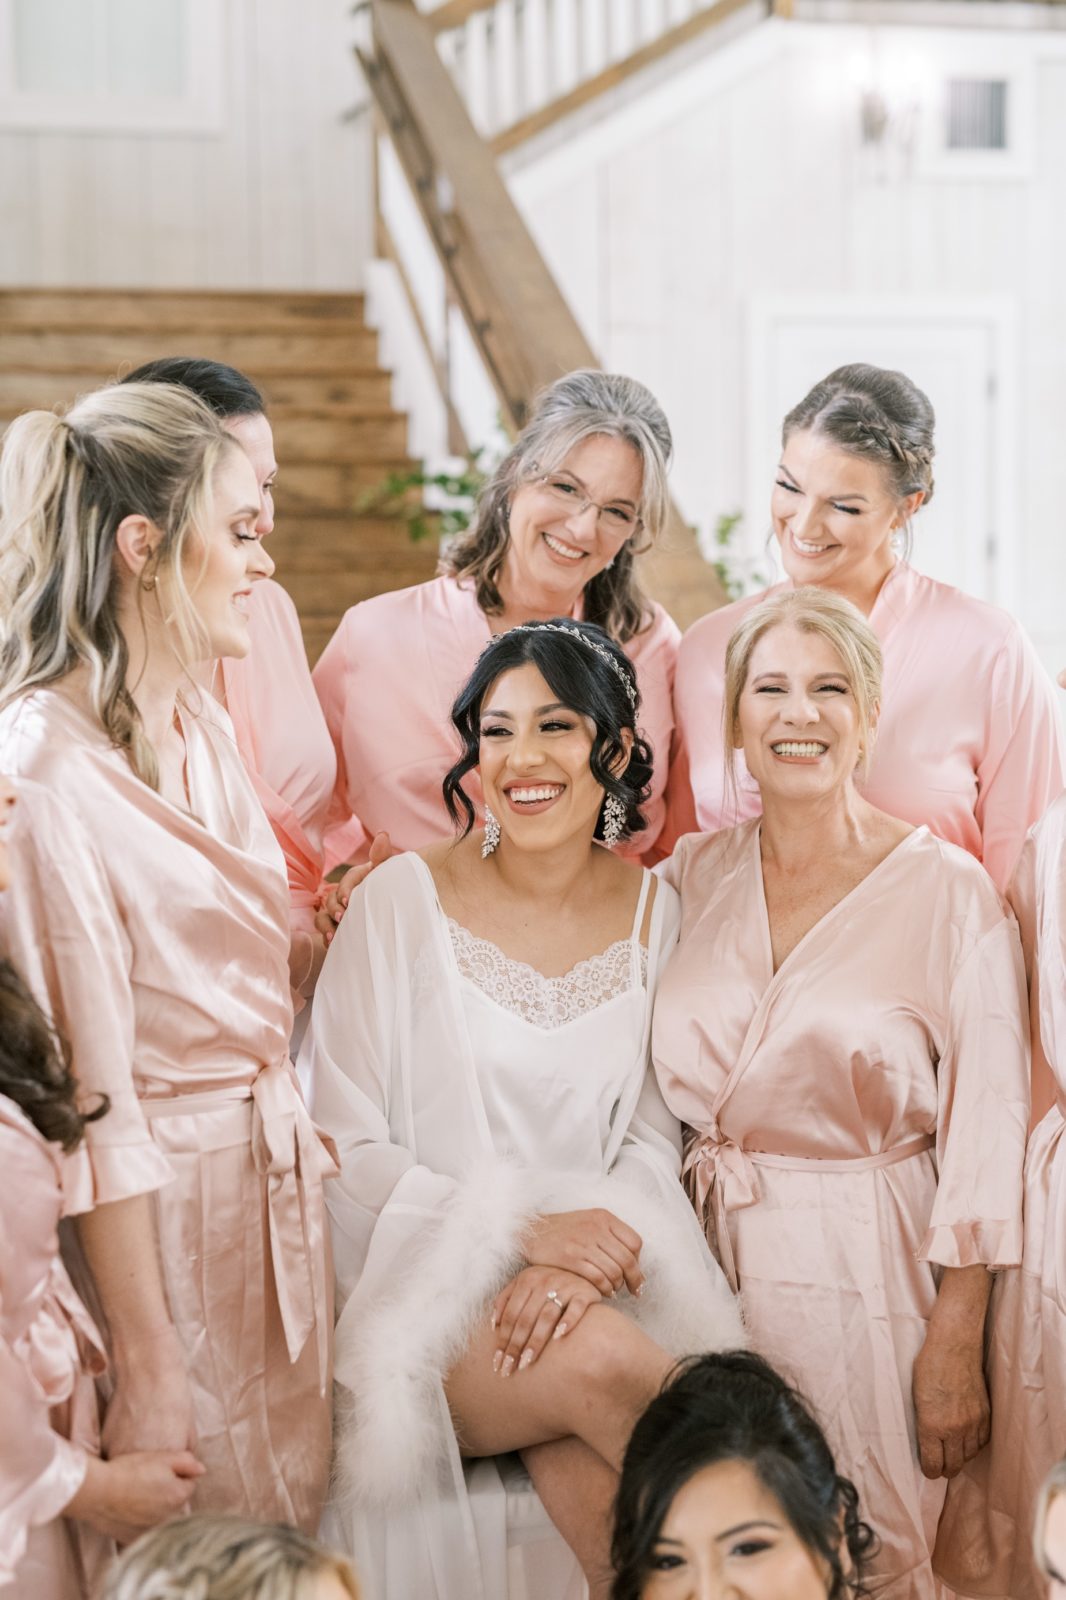 Bride with the bridal party all wearing pink robes on the stairs by Christina Elliott Photography. pink bridesmaids robes #ChristinaElliottPhotography #ChristinaElliottWeddings #Houstonweddings #TheSpringsVenue #EastHoustonweddings #Mrs #Mr